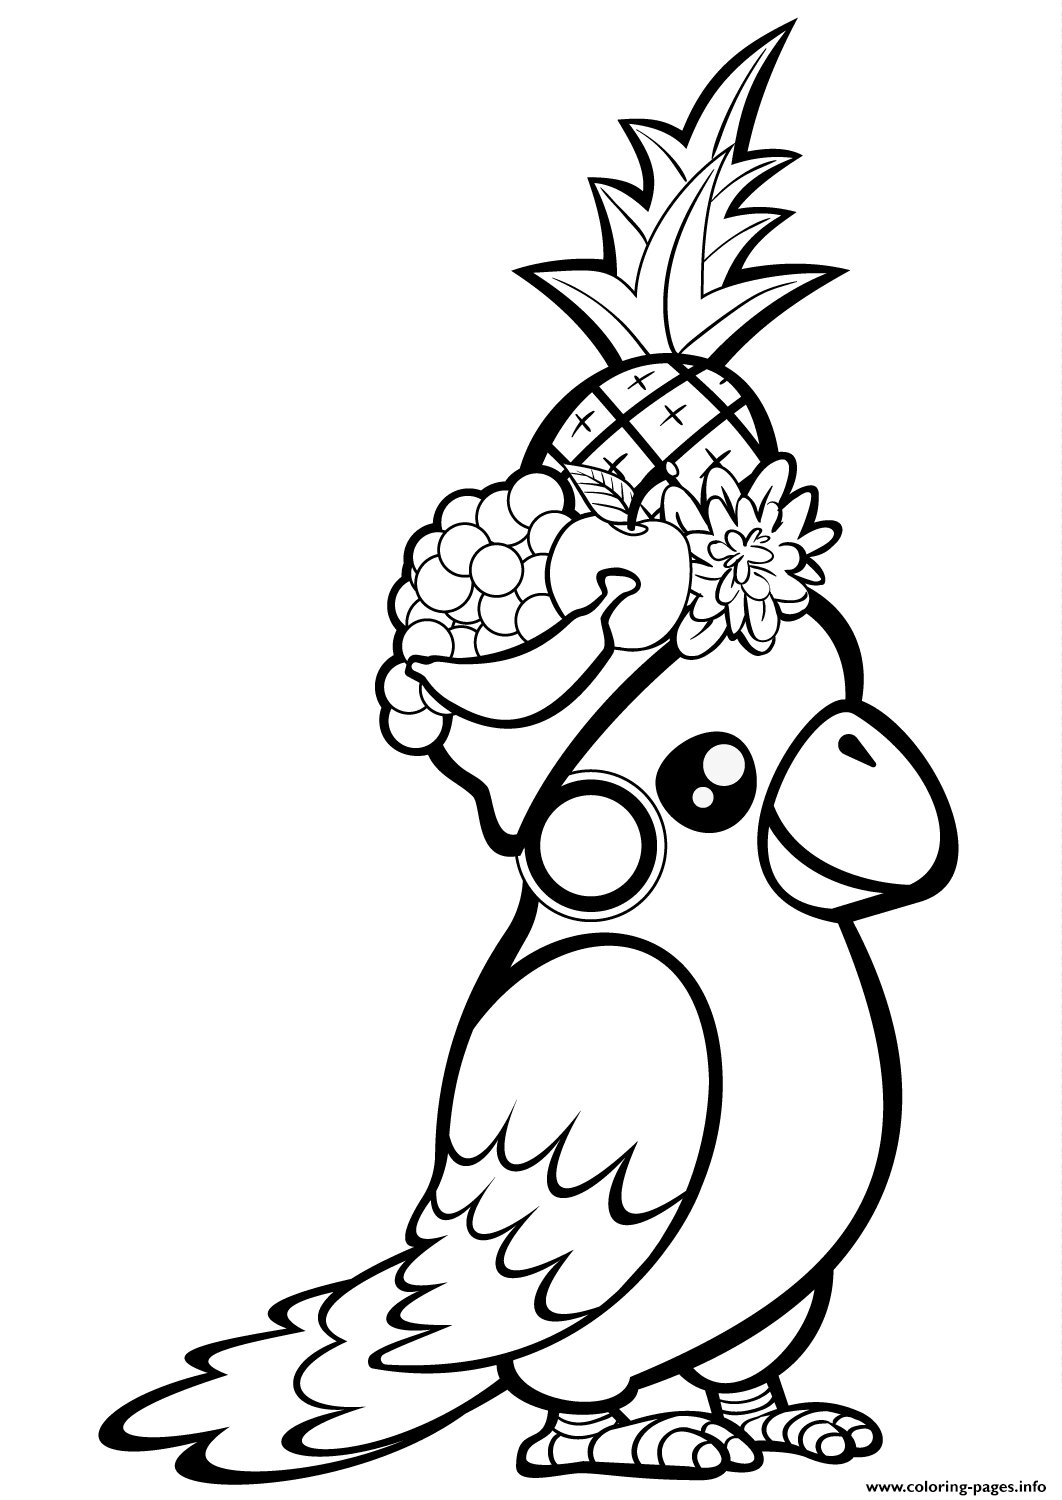 Cute Parrot With Fruit On Its Head coloring